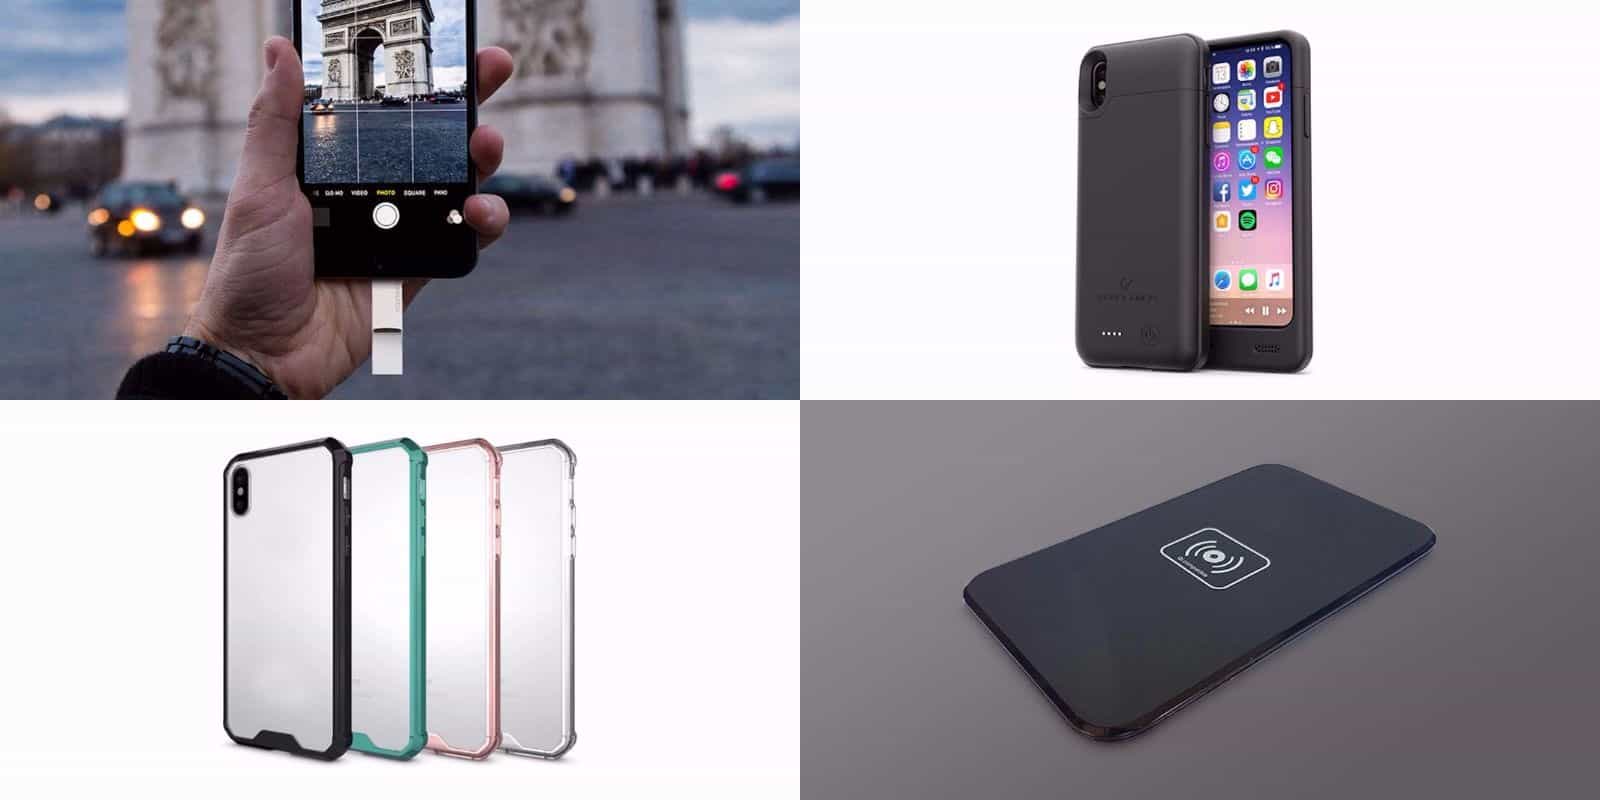 This roundup of iPhone X essentials covers wireless charging, drive expansions, and cases.